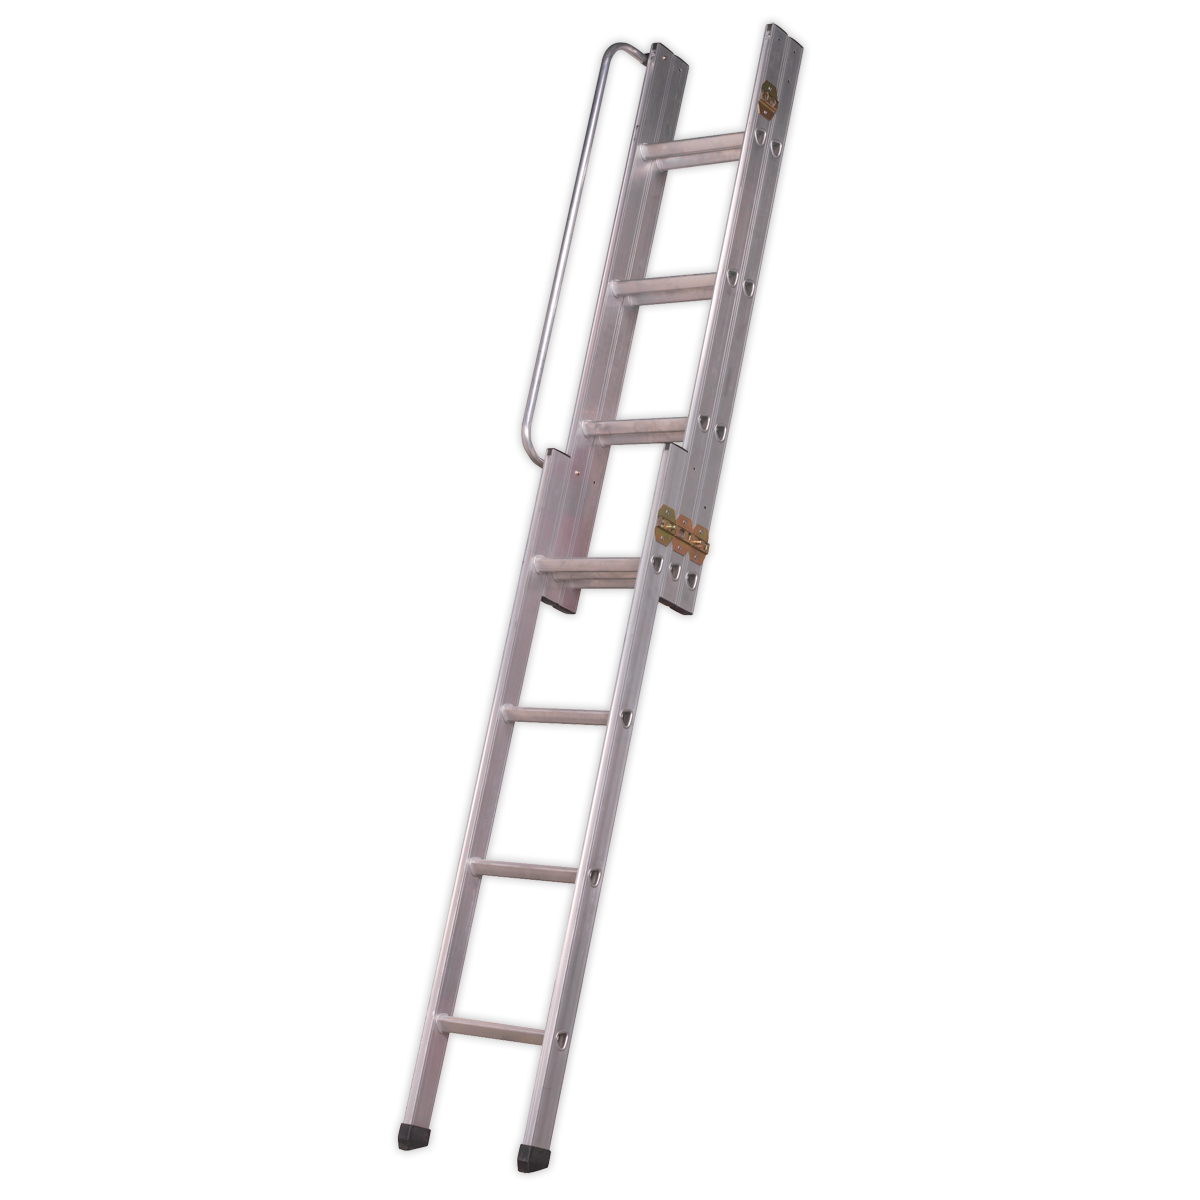 Sealey Loft Ladder 3-Section to BS 14975:2006